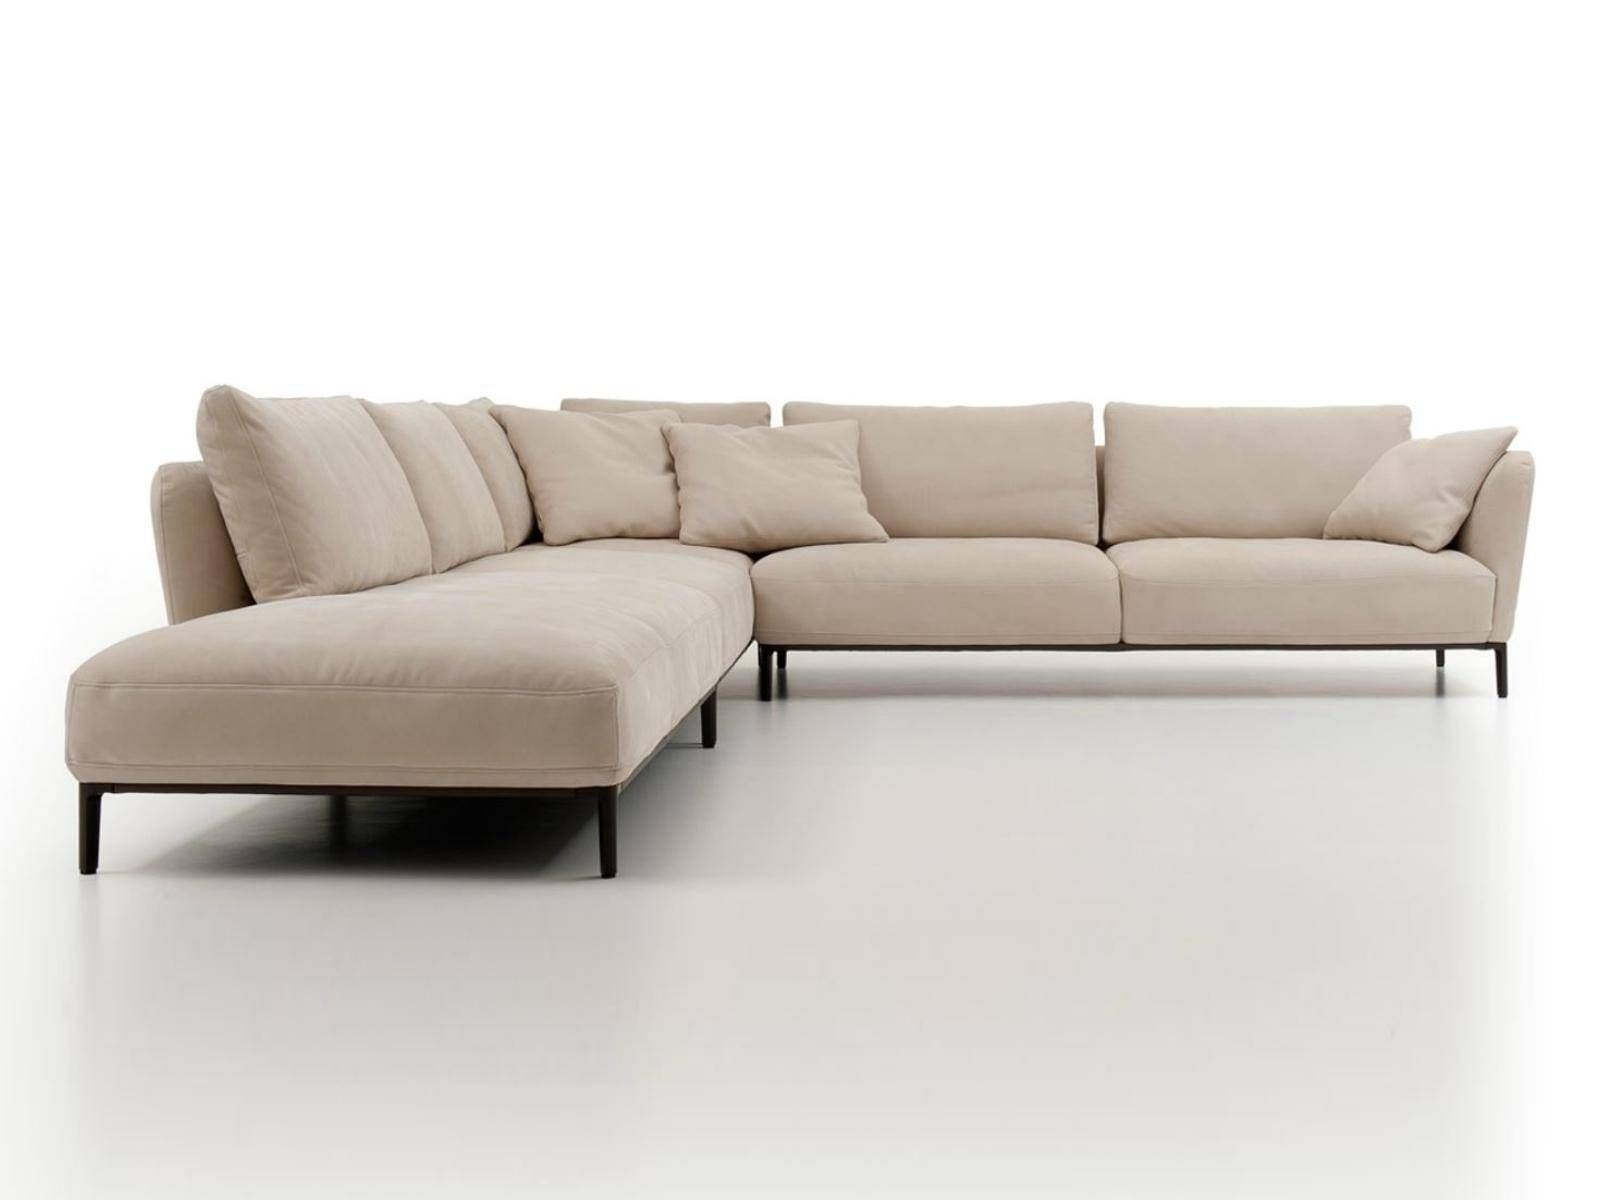 20 Best Collection Of Alan White Couches | Sofa Ideas With Regard To Alan White Couches (View 8 of 15)